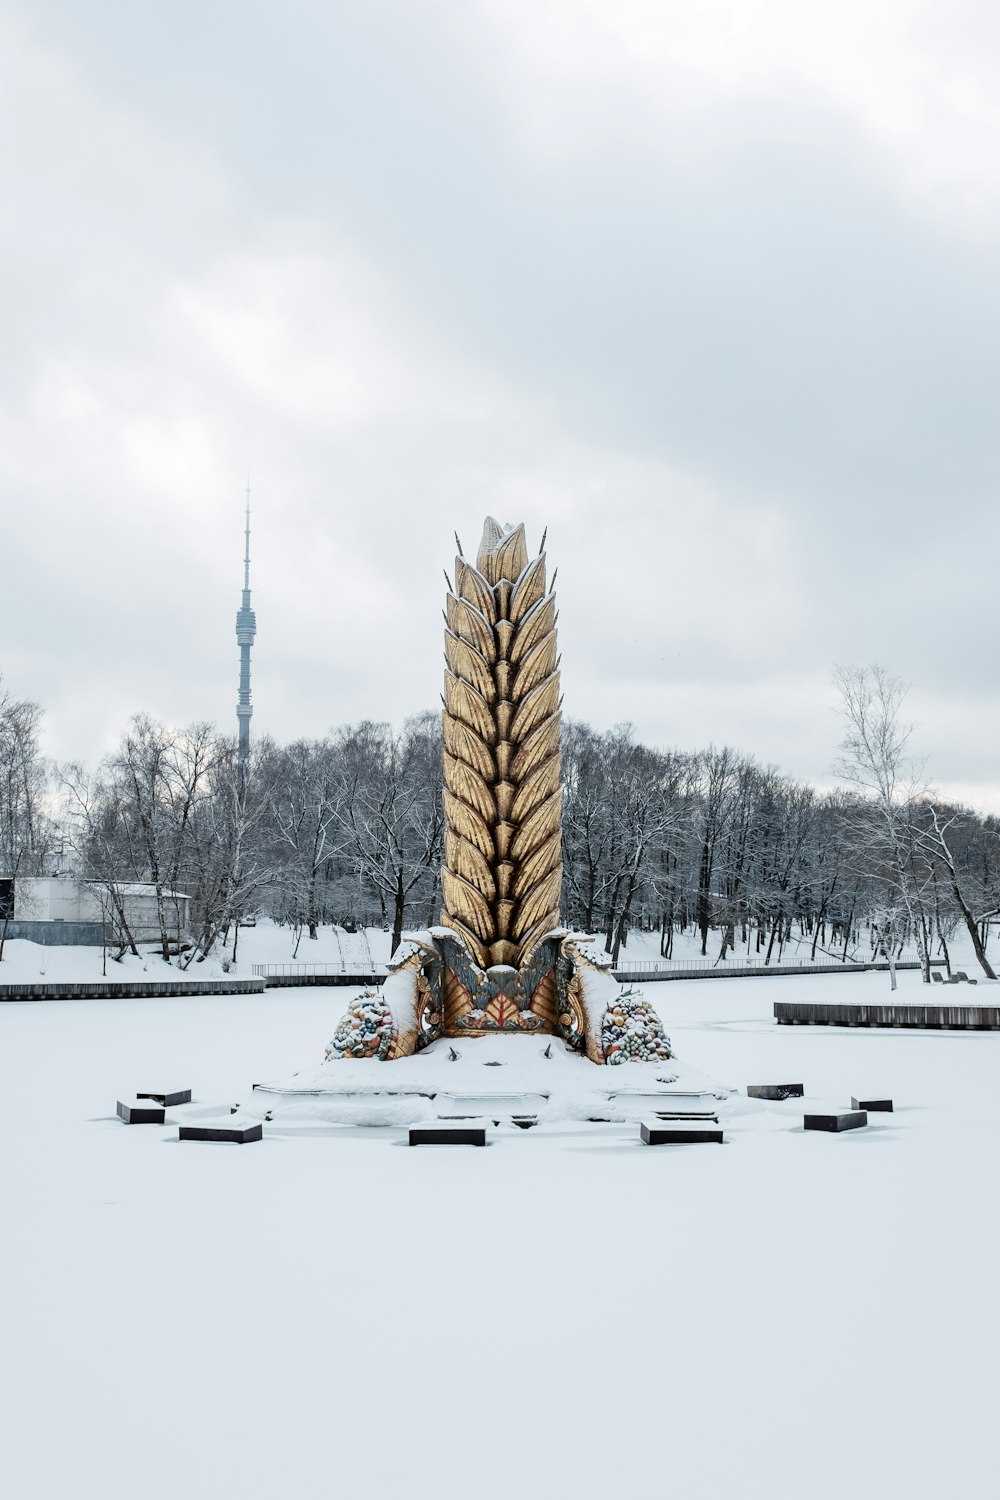 a large statue in the middle of a snowy field